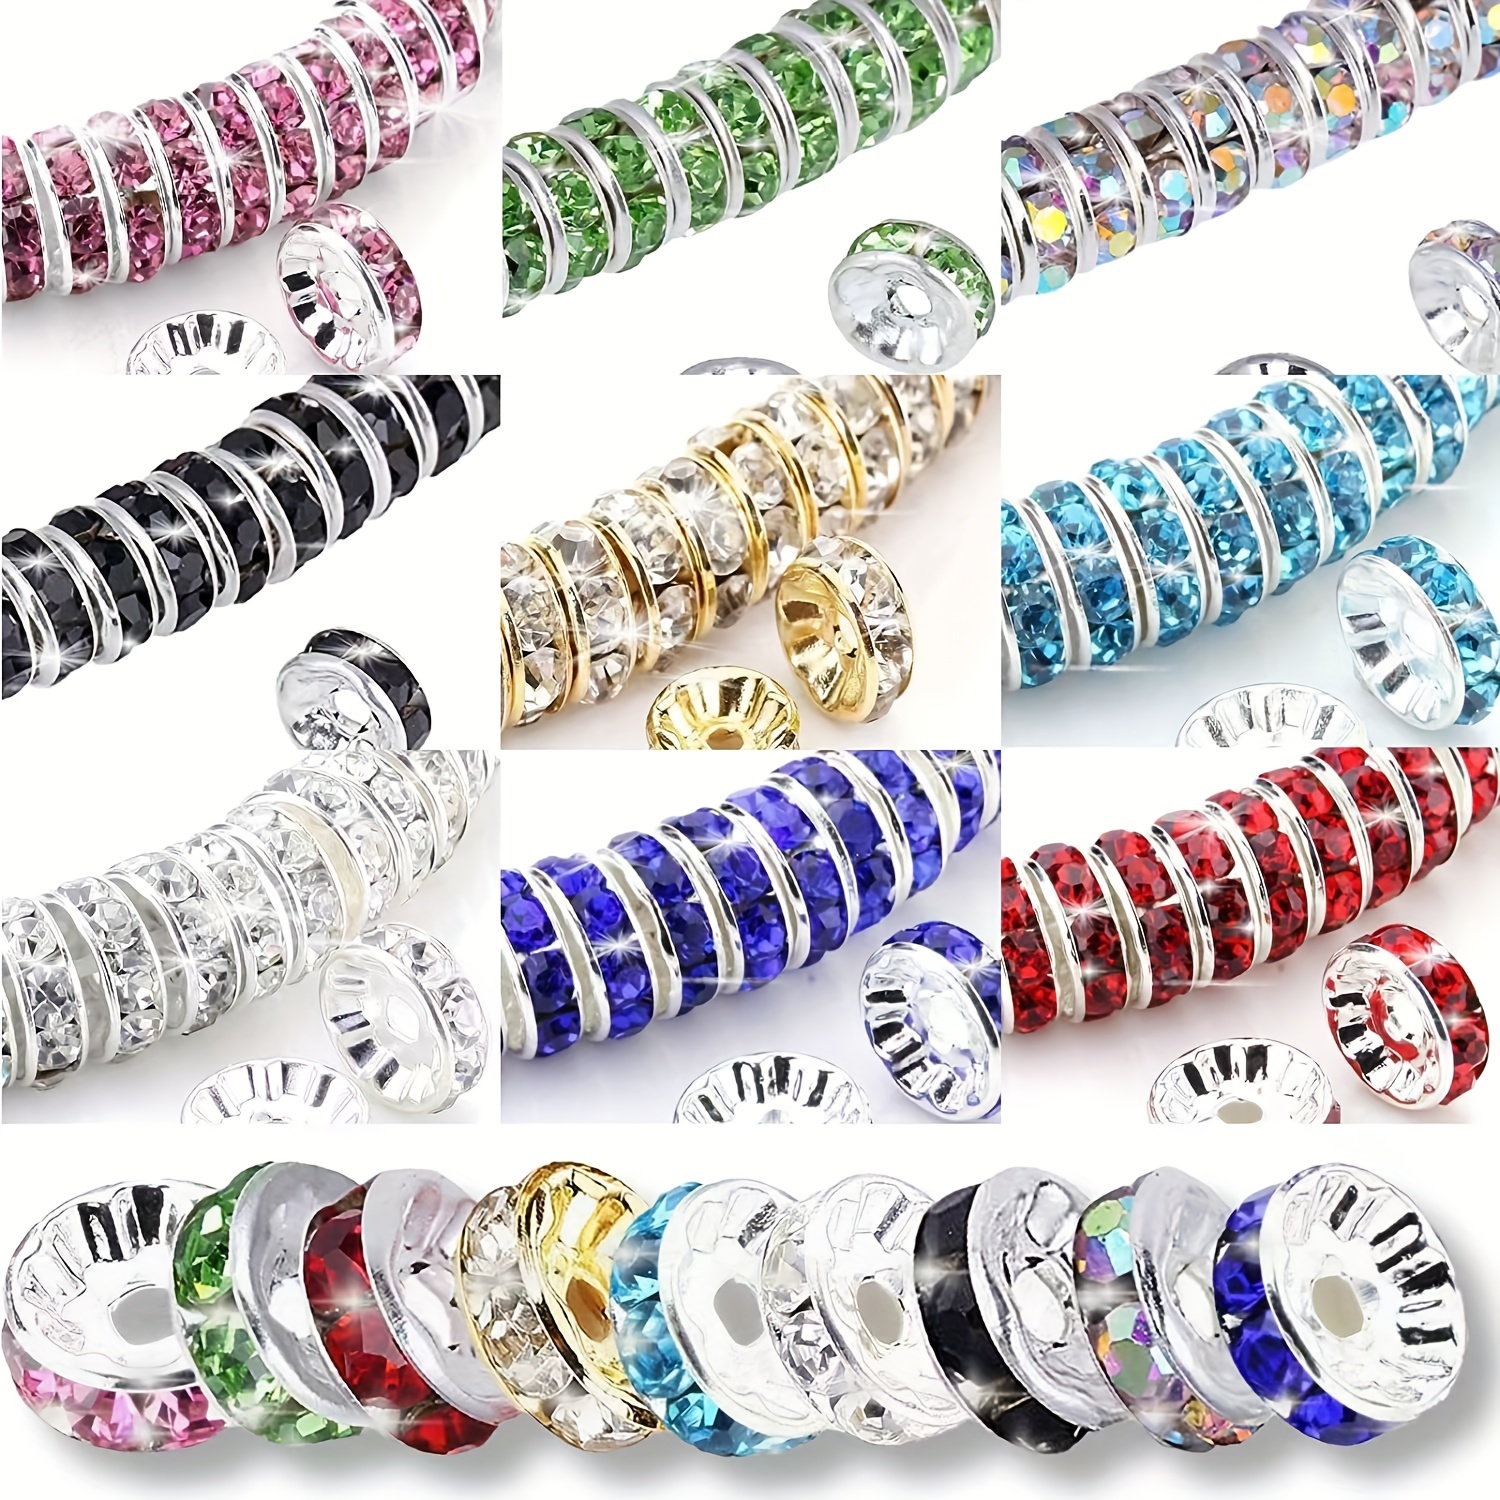 Allb 100pcs Rondelle Spacer Beads 8mm Silver Plated Czech Crystal Rhinestone for Jewelry Making Loose Beads for Bracelets